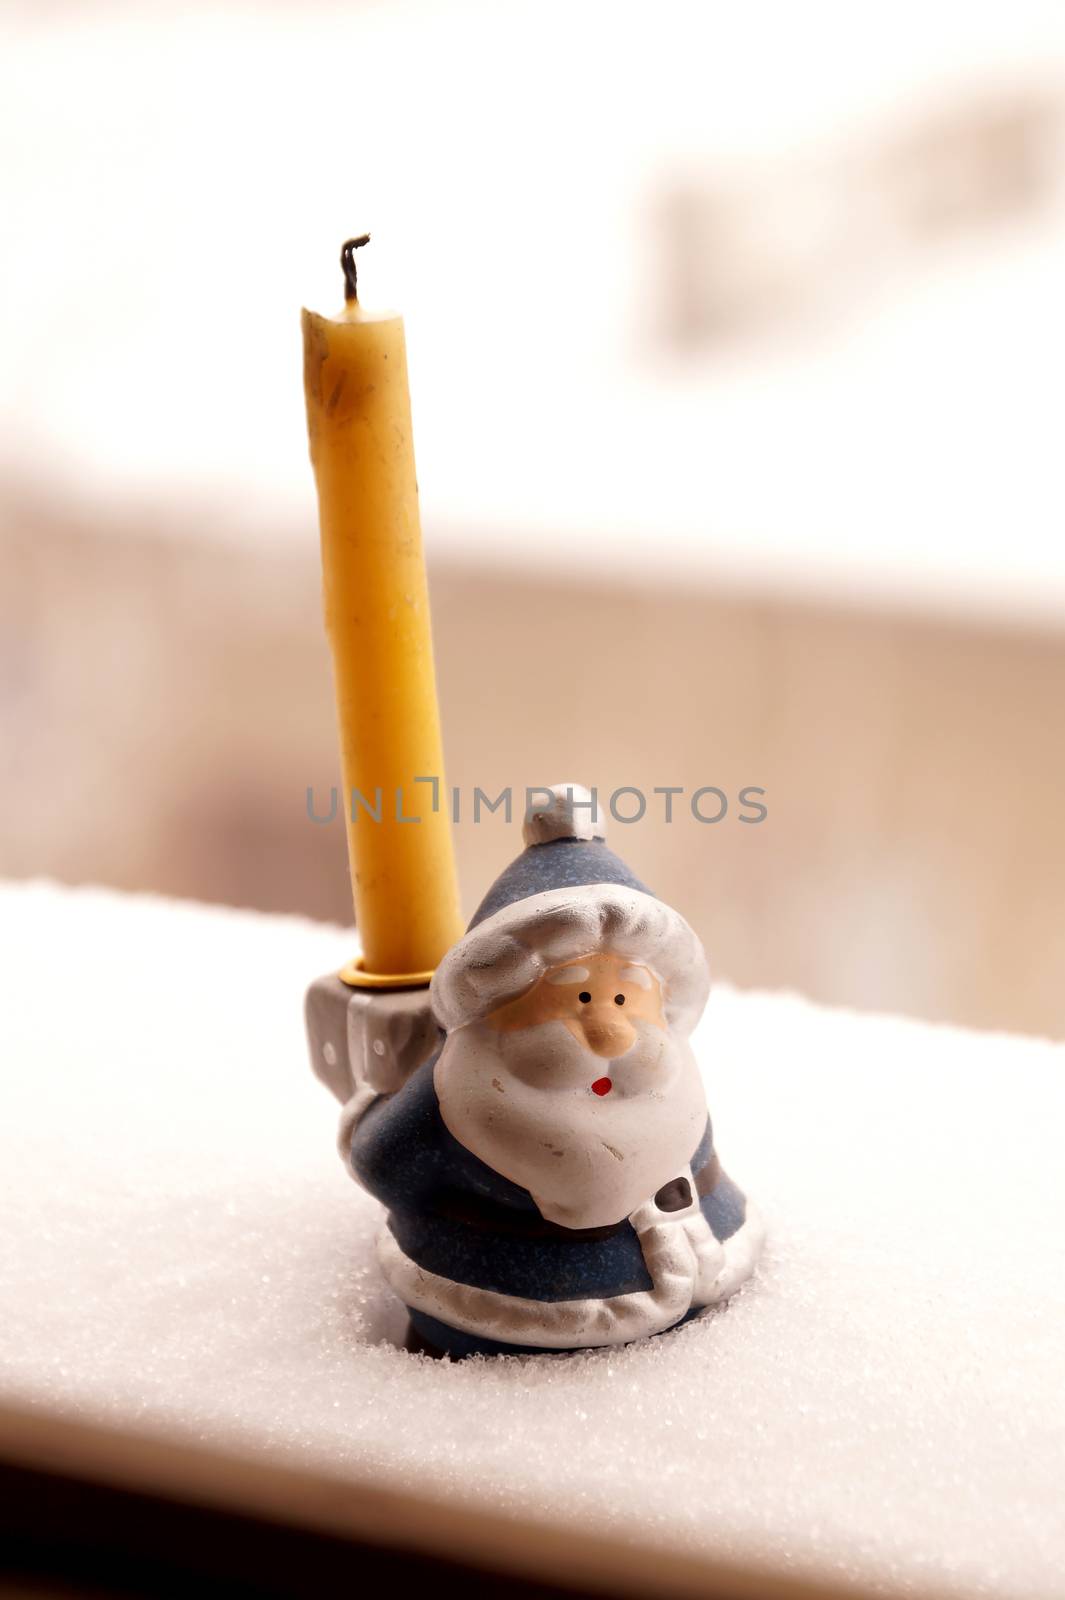 Support under a candle in the form of Father Frost by Vadimdem